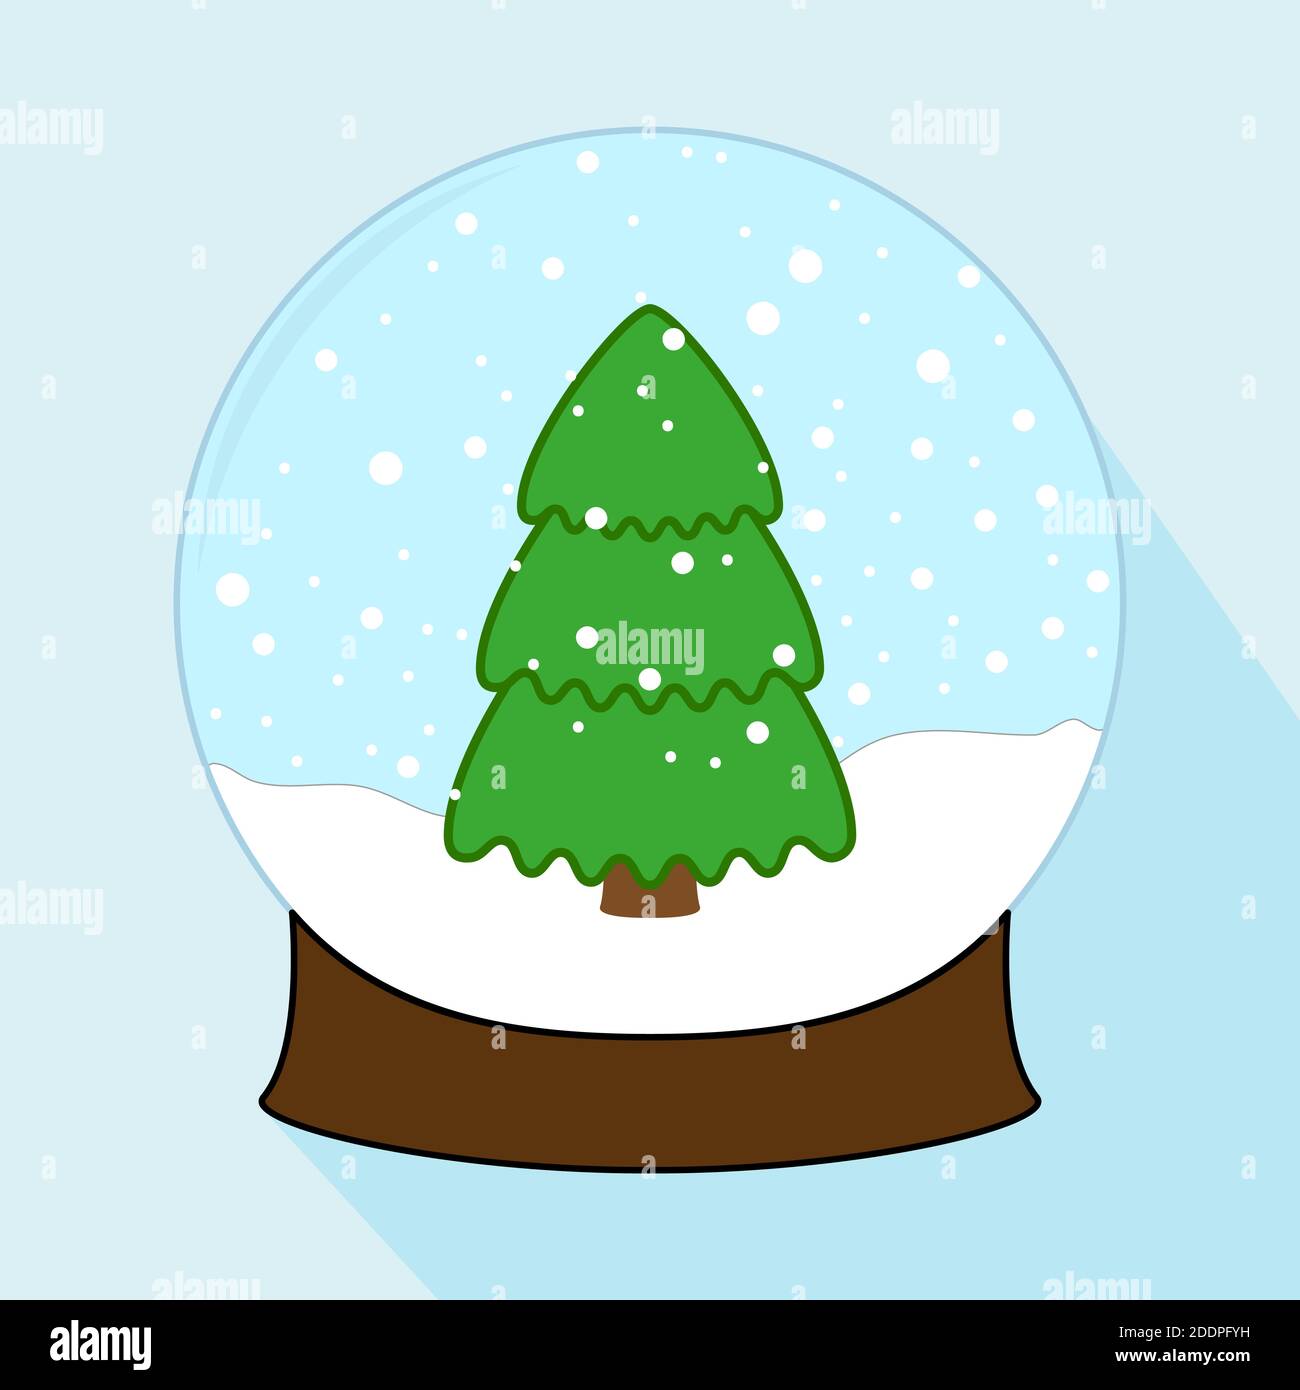 Christmas decoration, crystal ball. Christmas snowball with Christmas tree and snowflakes. Holiday symbol isolated on blue background in flat design. Stock Vector